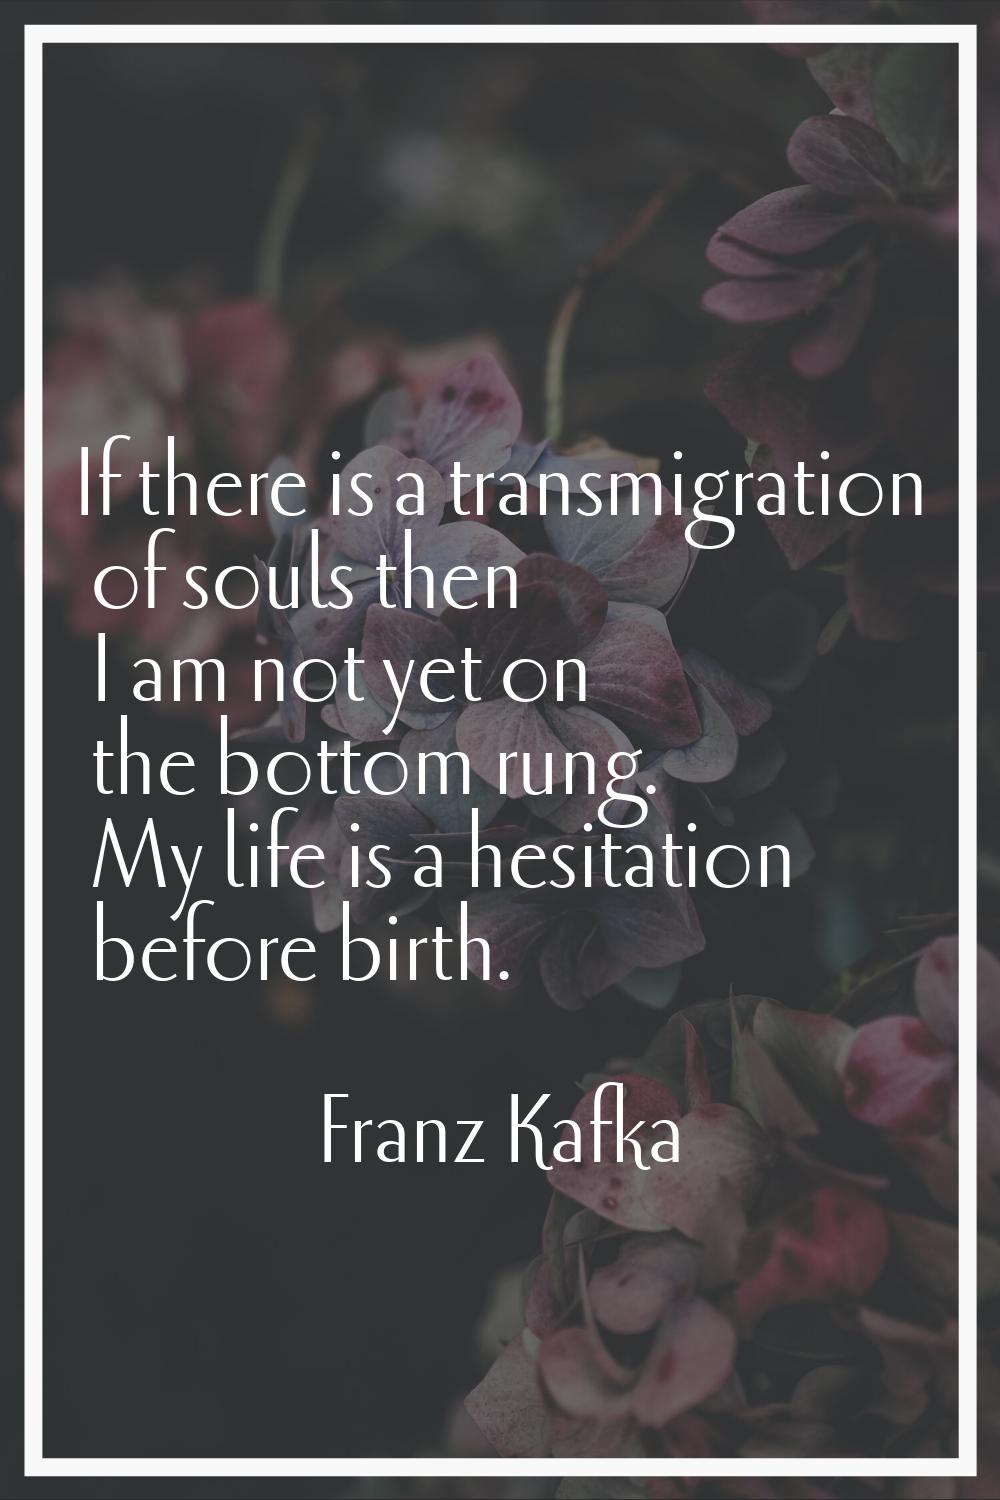 If there is a transmigration of souls then I am not yet on the bottom rung. My life is a hesitation